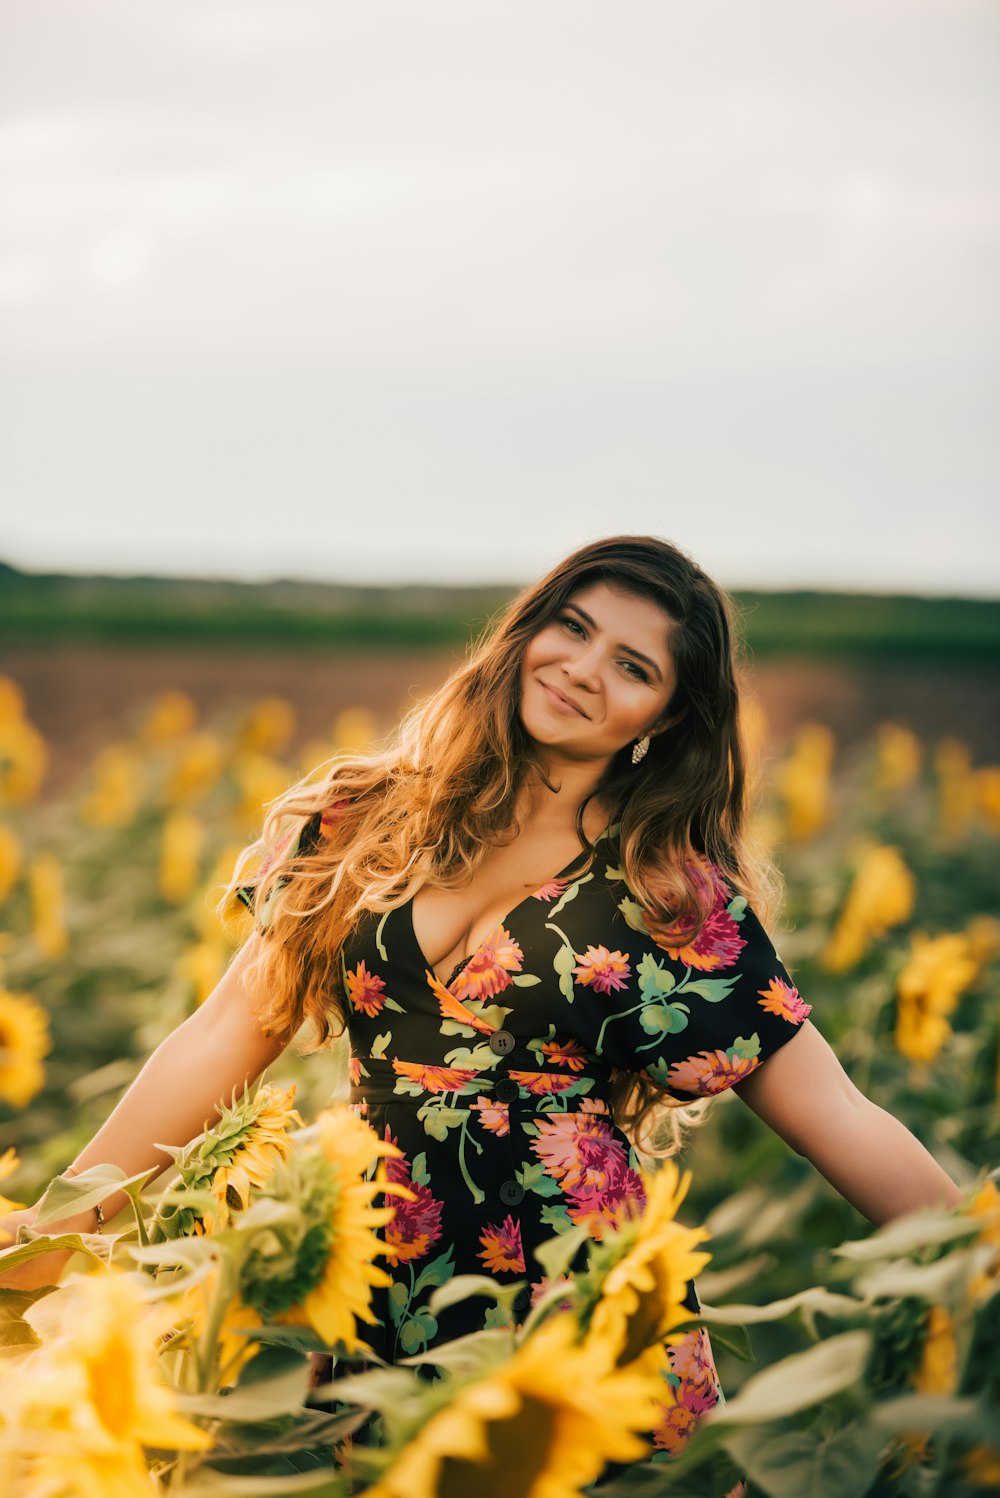 woman standing in sunflower field while smiling during daytime